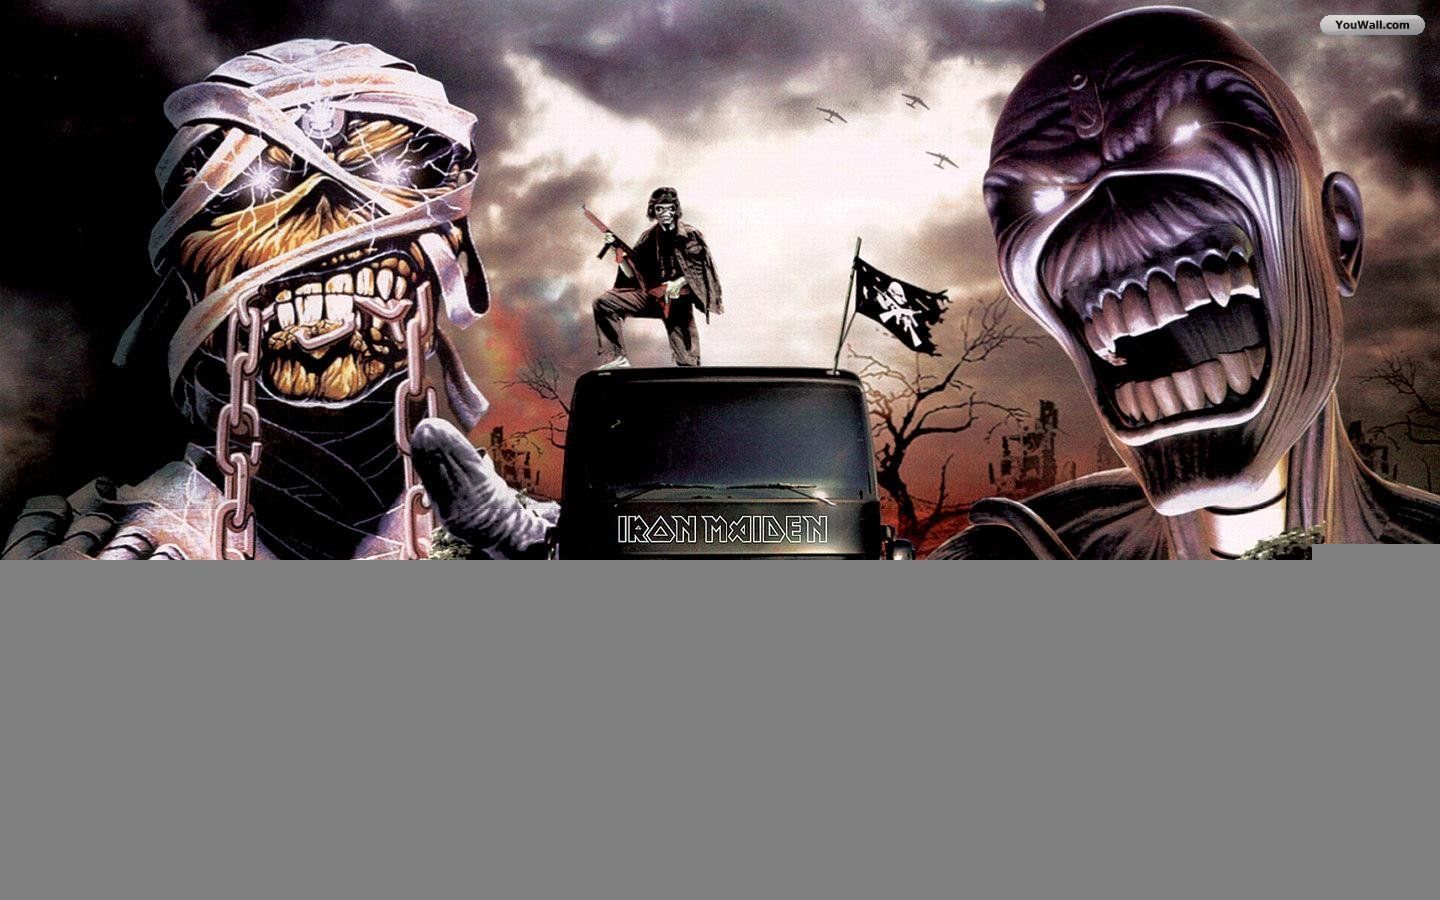 YouWall - Iron Maiden - On The Road Wallpaper - wallpaper ...